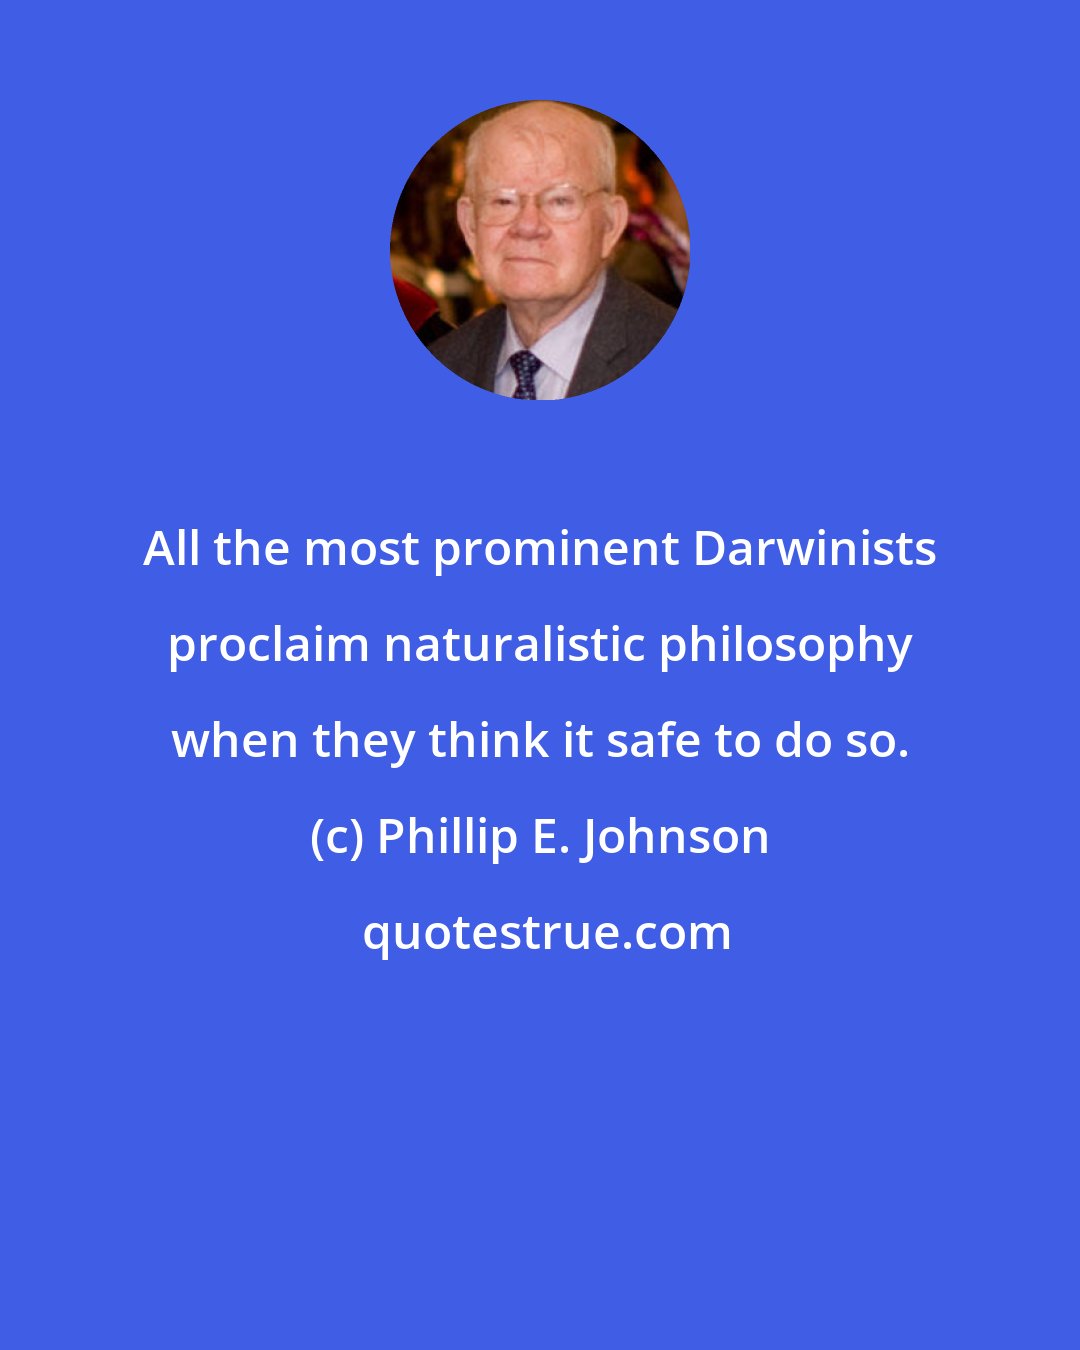 Phillip E. Johnson: All the most prominent Darwinists proclaim naturalistic philosophy when they think it safe to do so.